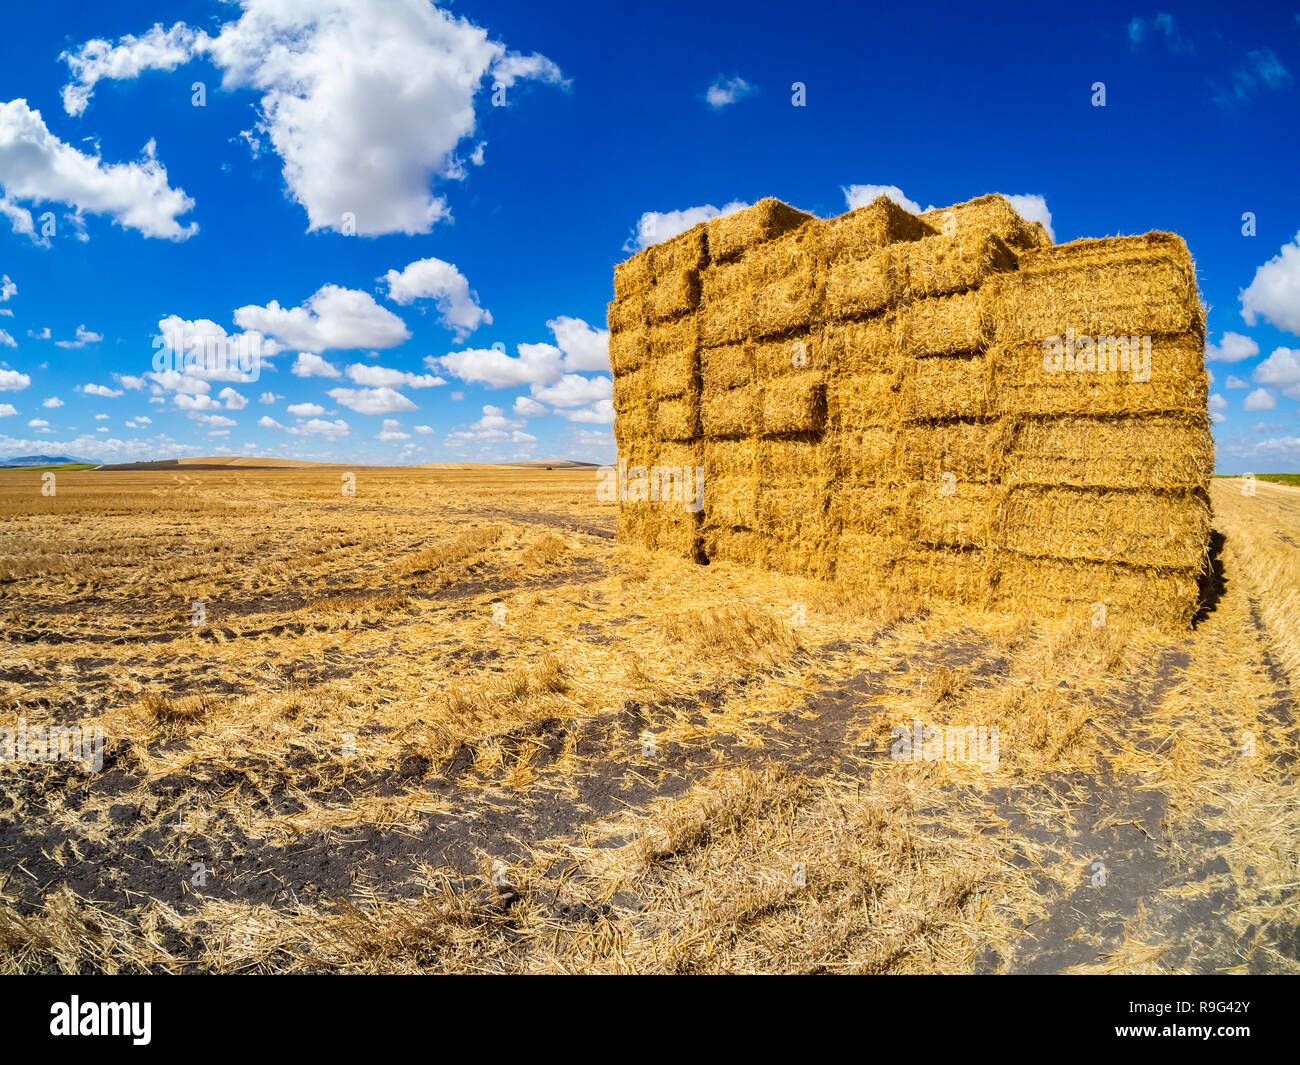 Bales of straw piled up after harvest Stock Photo